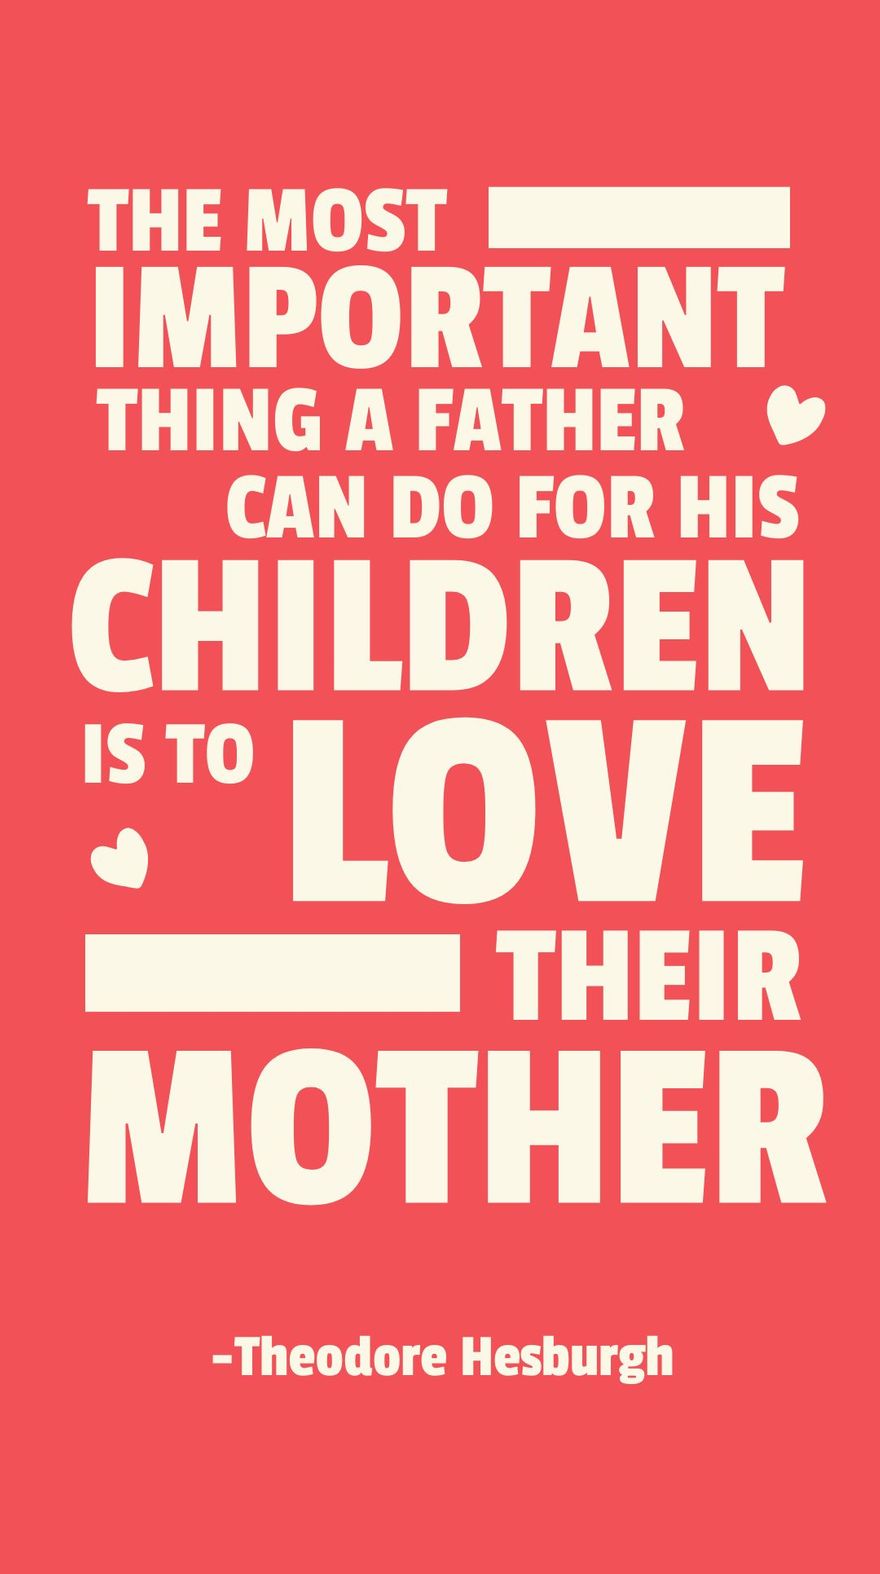 Theodore Hesburgh - The most important thing a father can do for his children is to love their mother. 